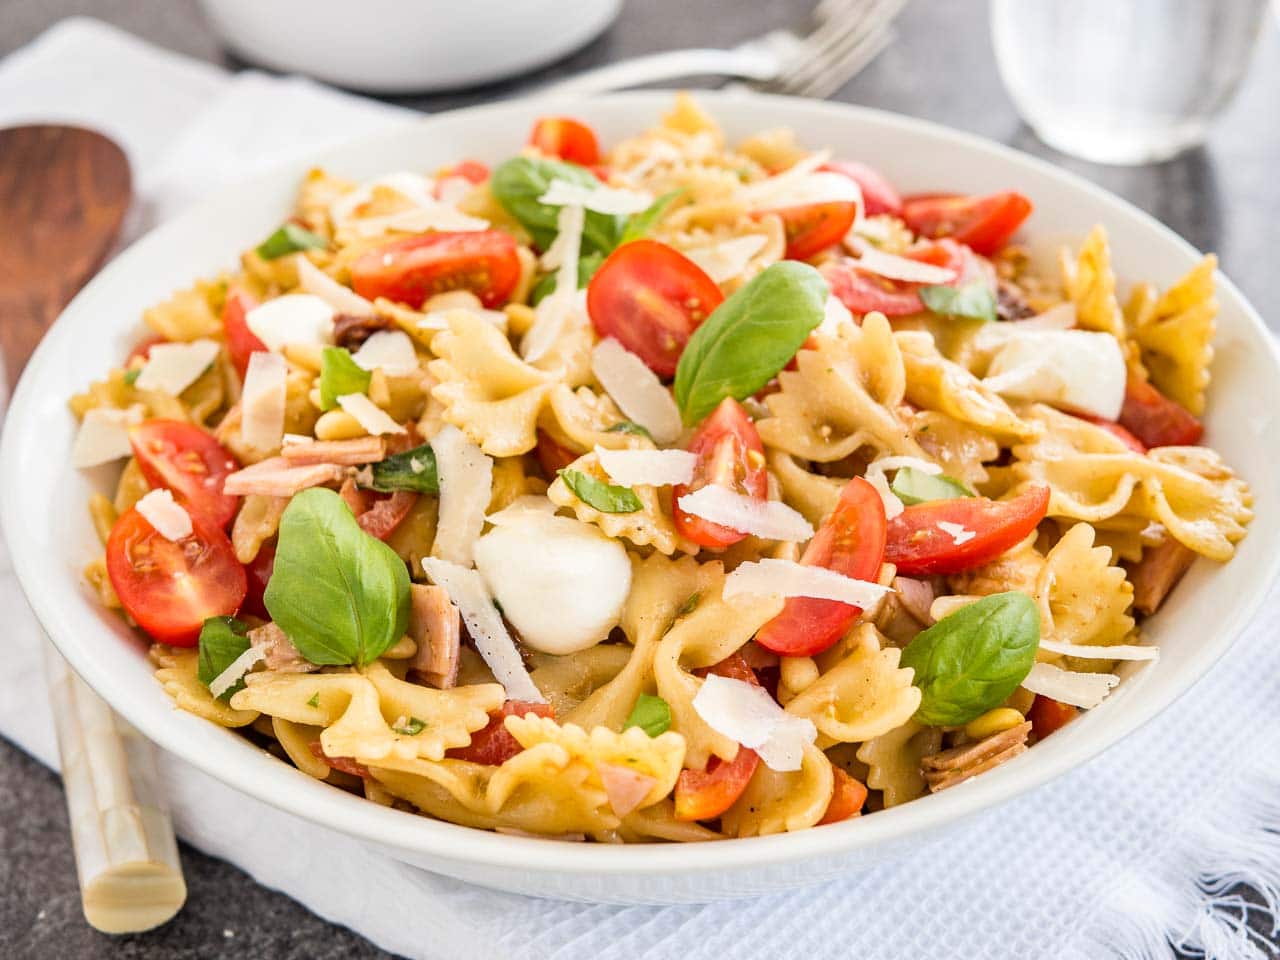 A white bowl with pasta salad with italian dressing, with tomato, mozzarella, basil leaves and shavings of Parmiggiano. The bowl is sitting on a white dishtowel with forks, a glass of water and salad tongs in the background.